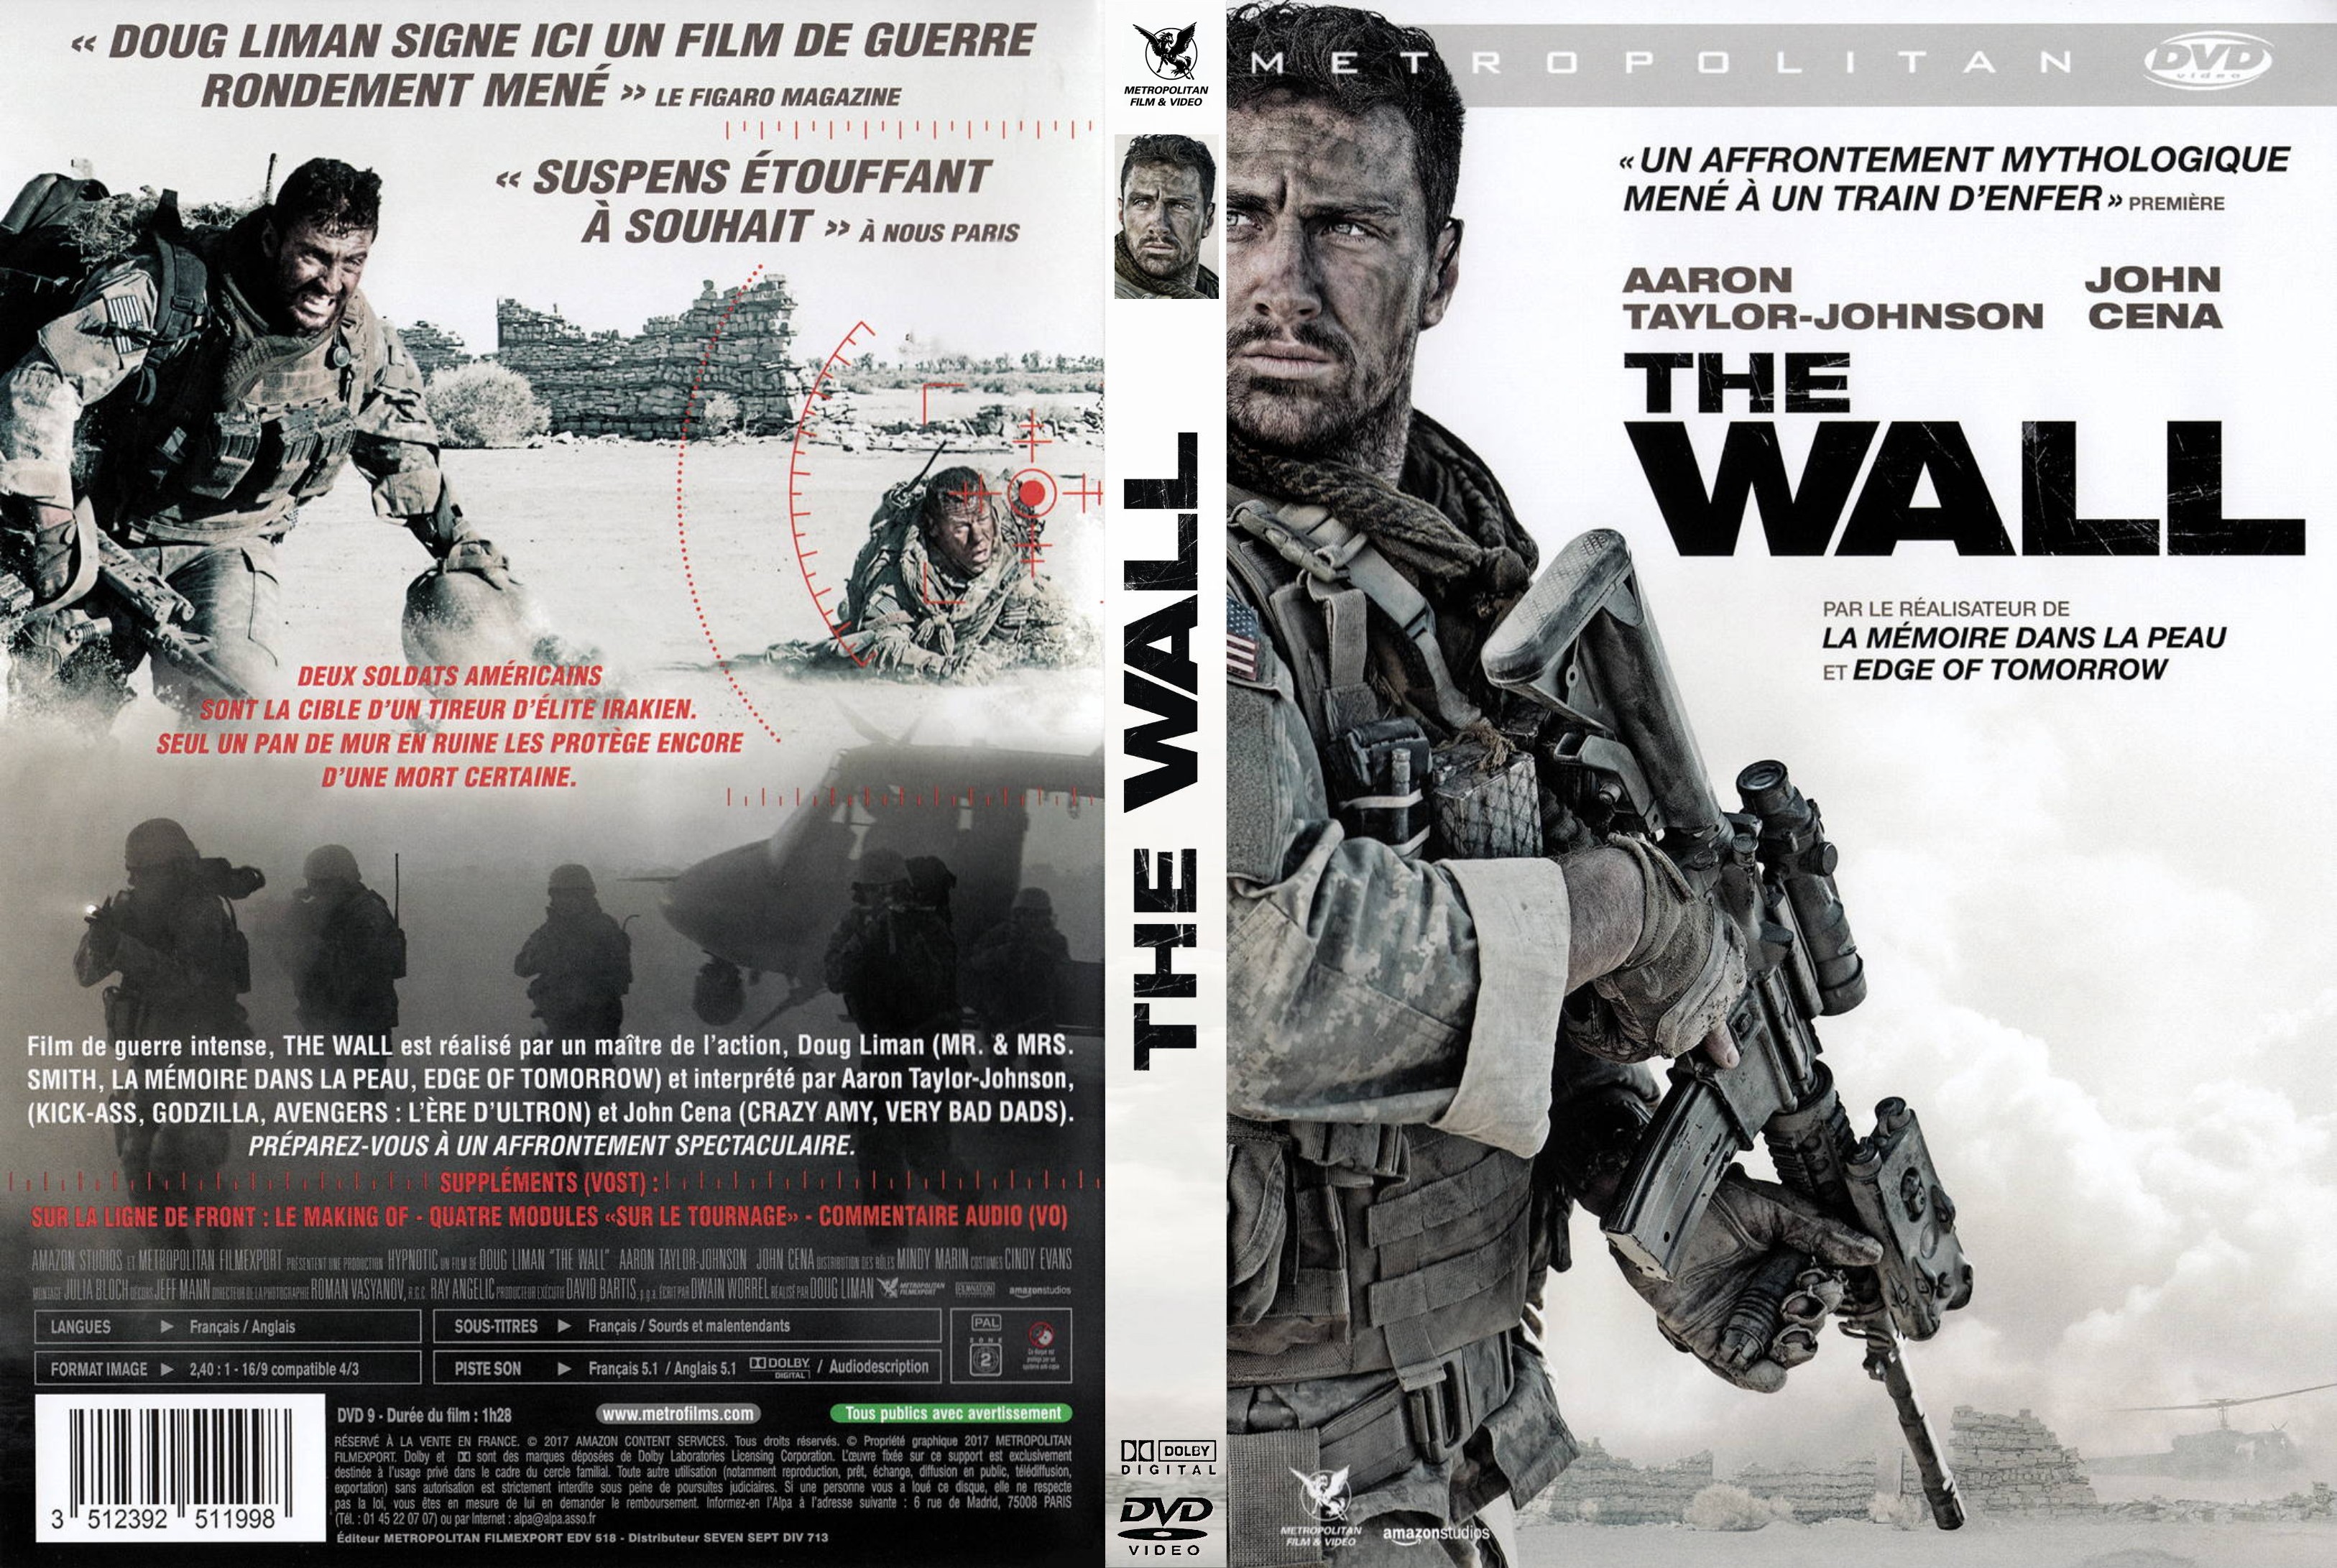 Jaquette DVD The Wall custom